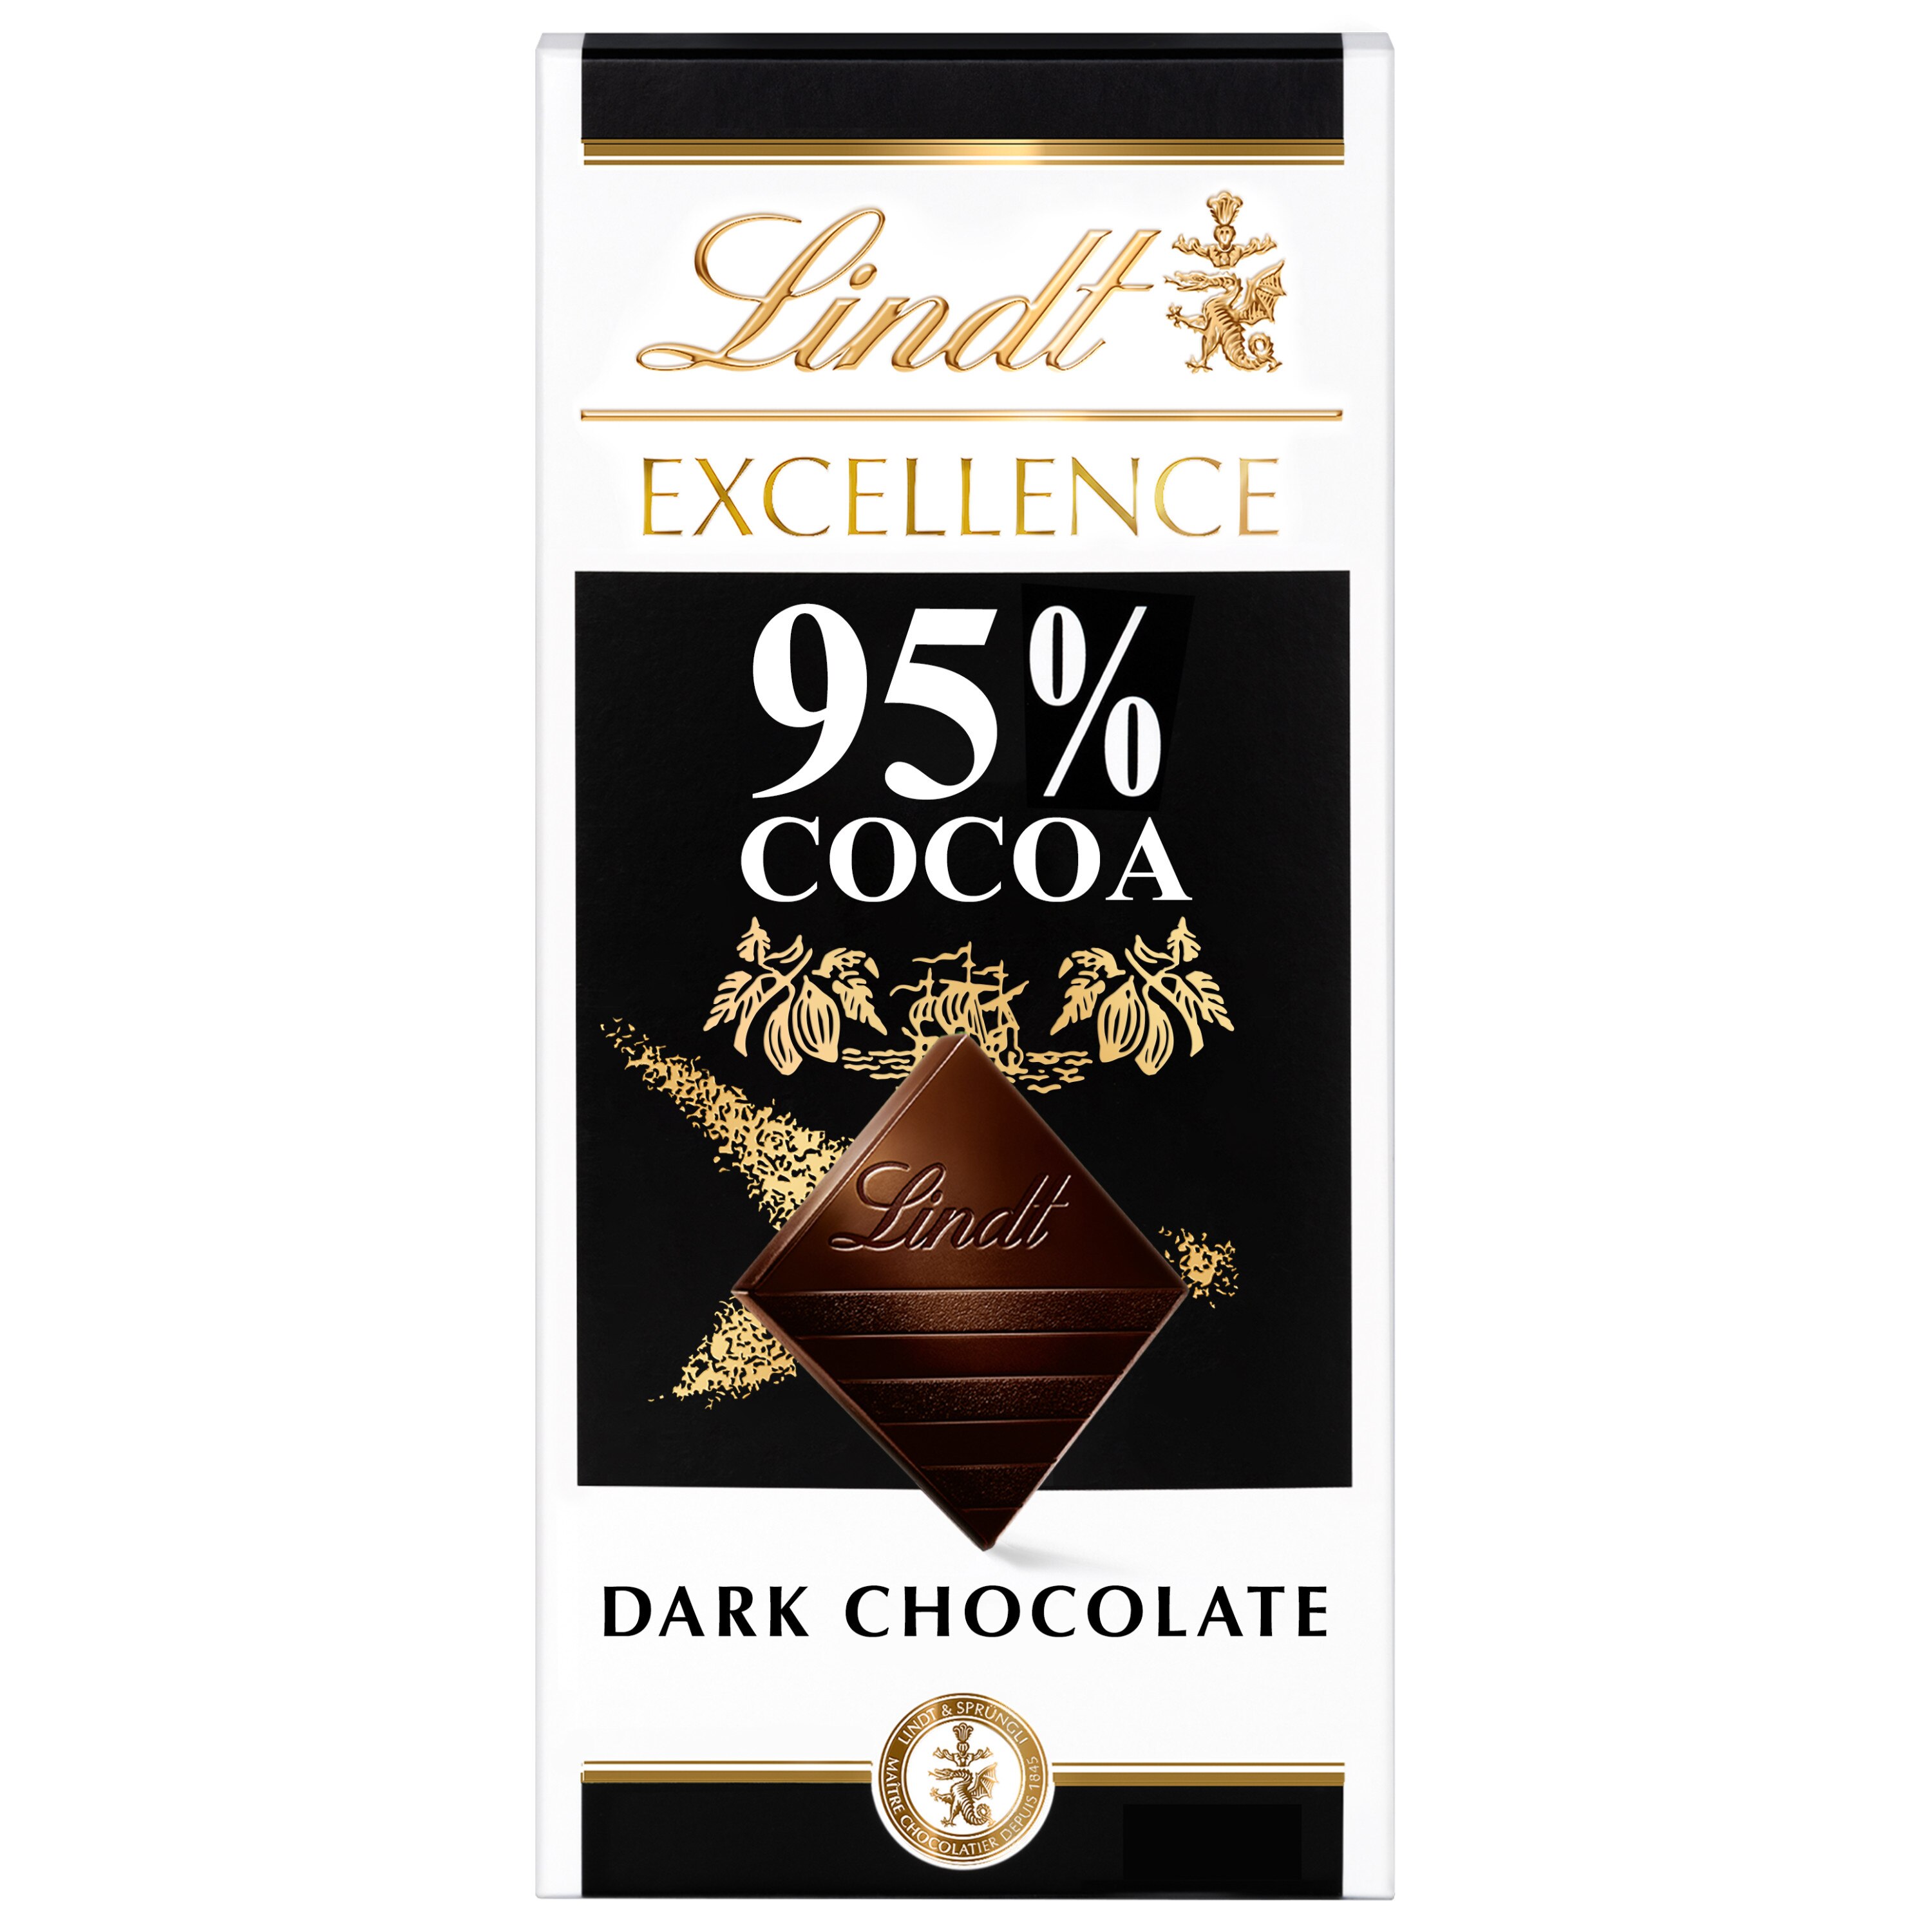 Lindt EXCELLENCE 95% Cocoa Dark Chocolate Candy Bar, Dark Chocolate Candy, 2.8 Oz. Bar , CVS